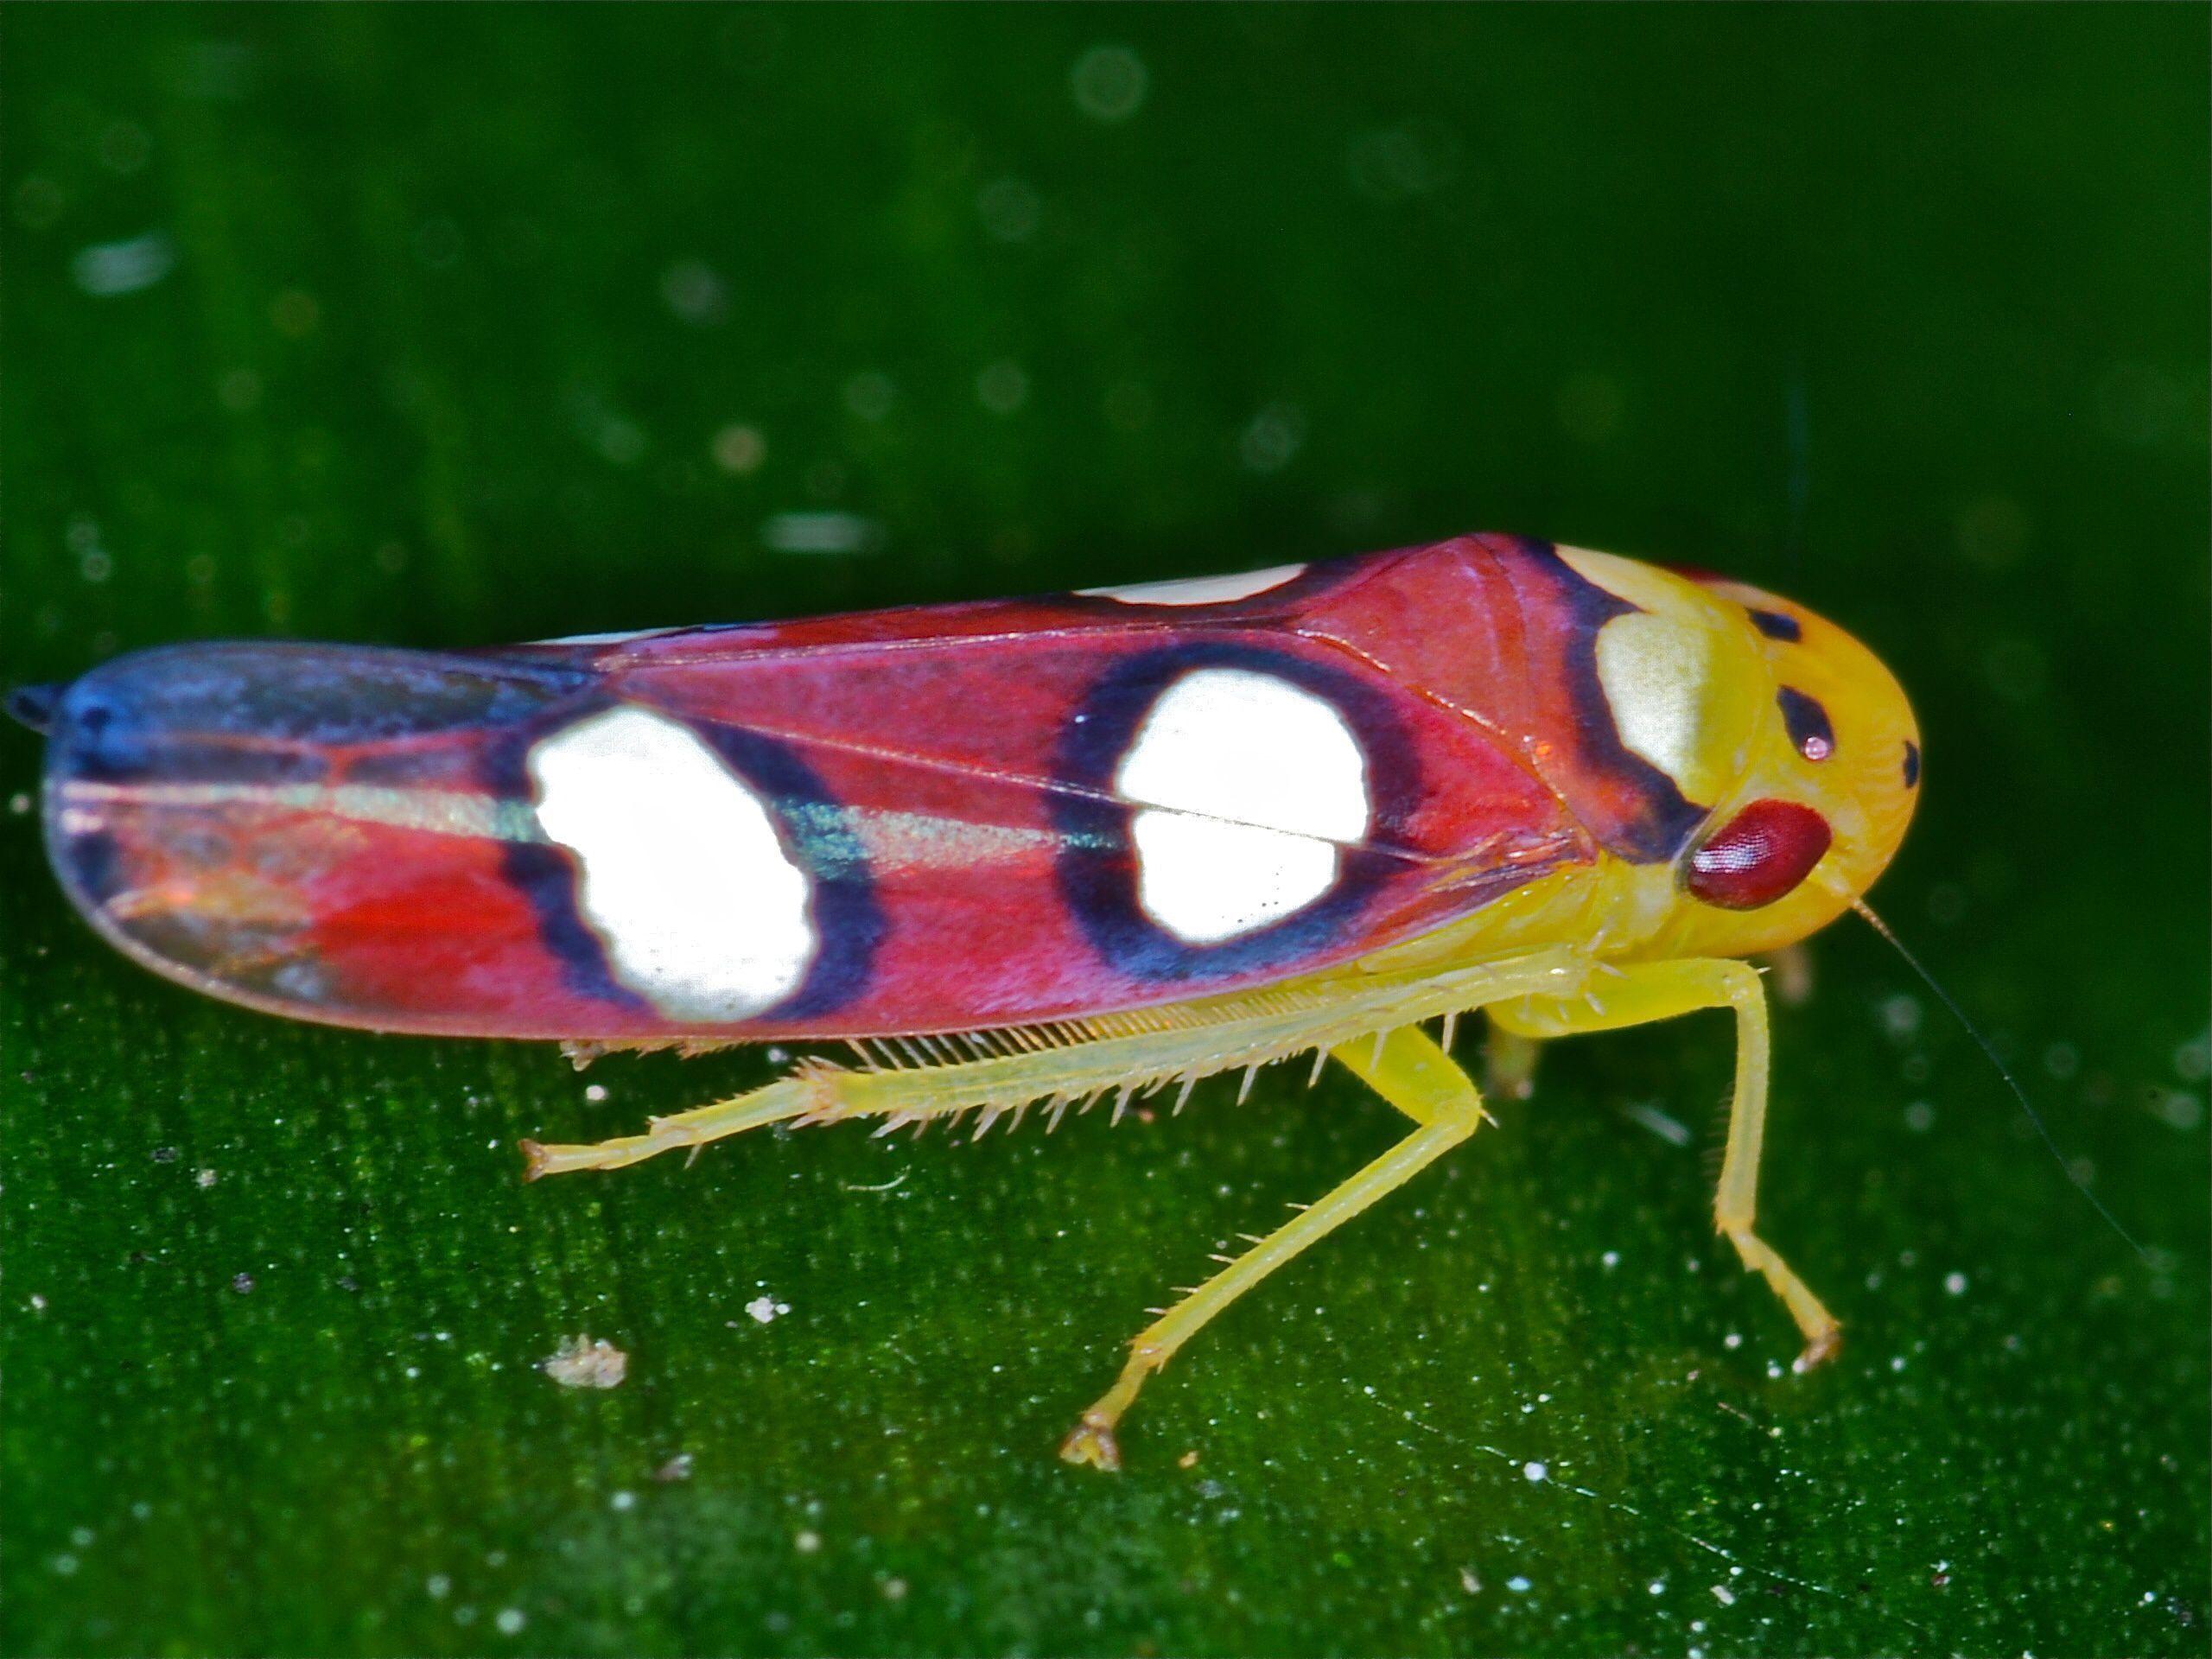 Leafhopper Free HD Wallpapers Image Backgrounds